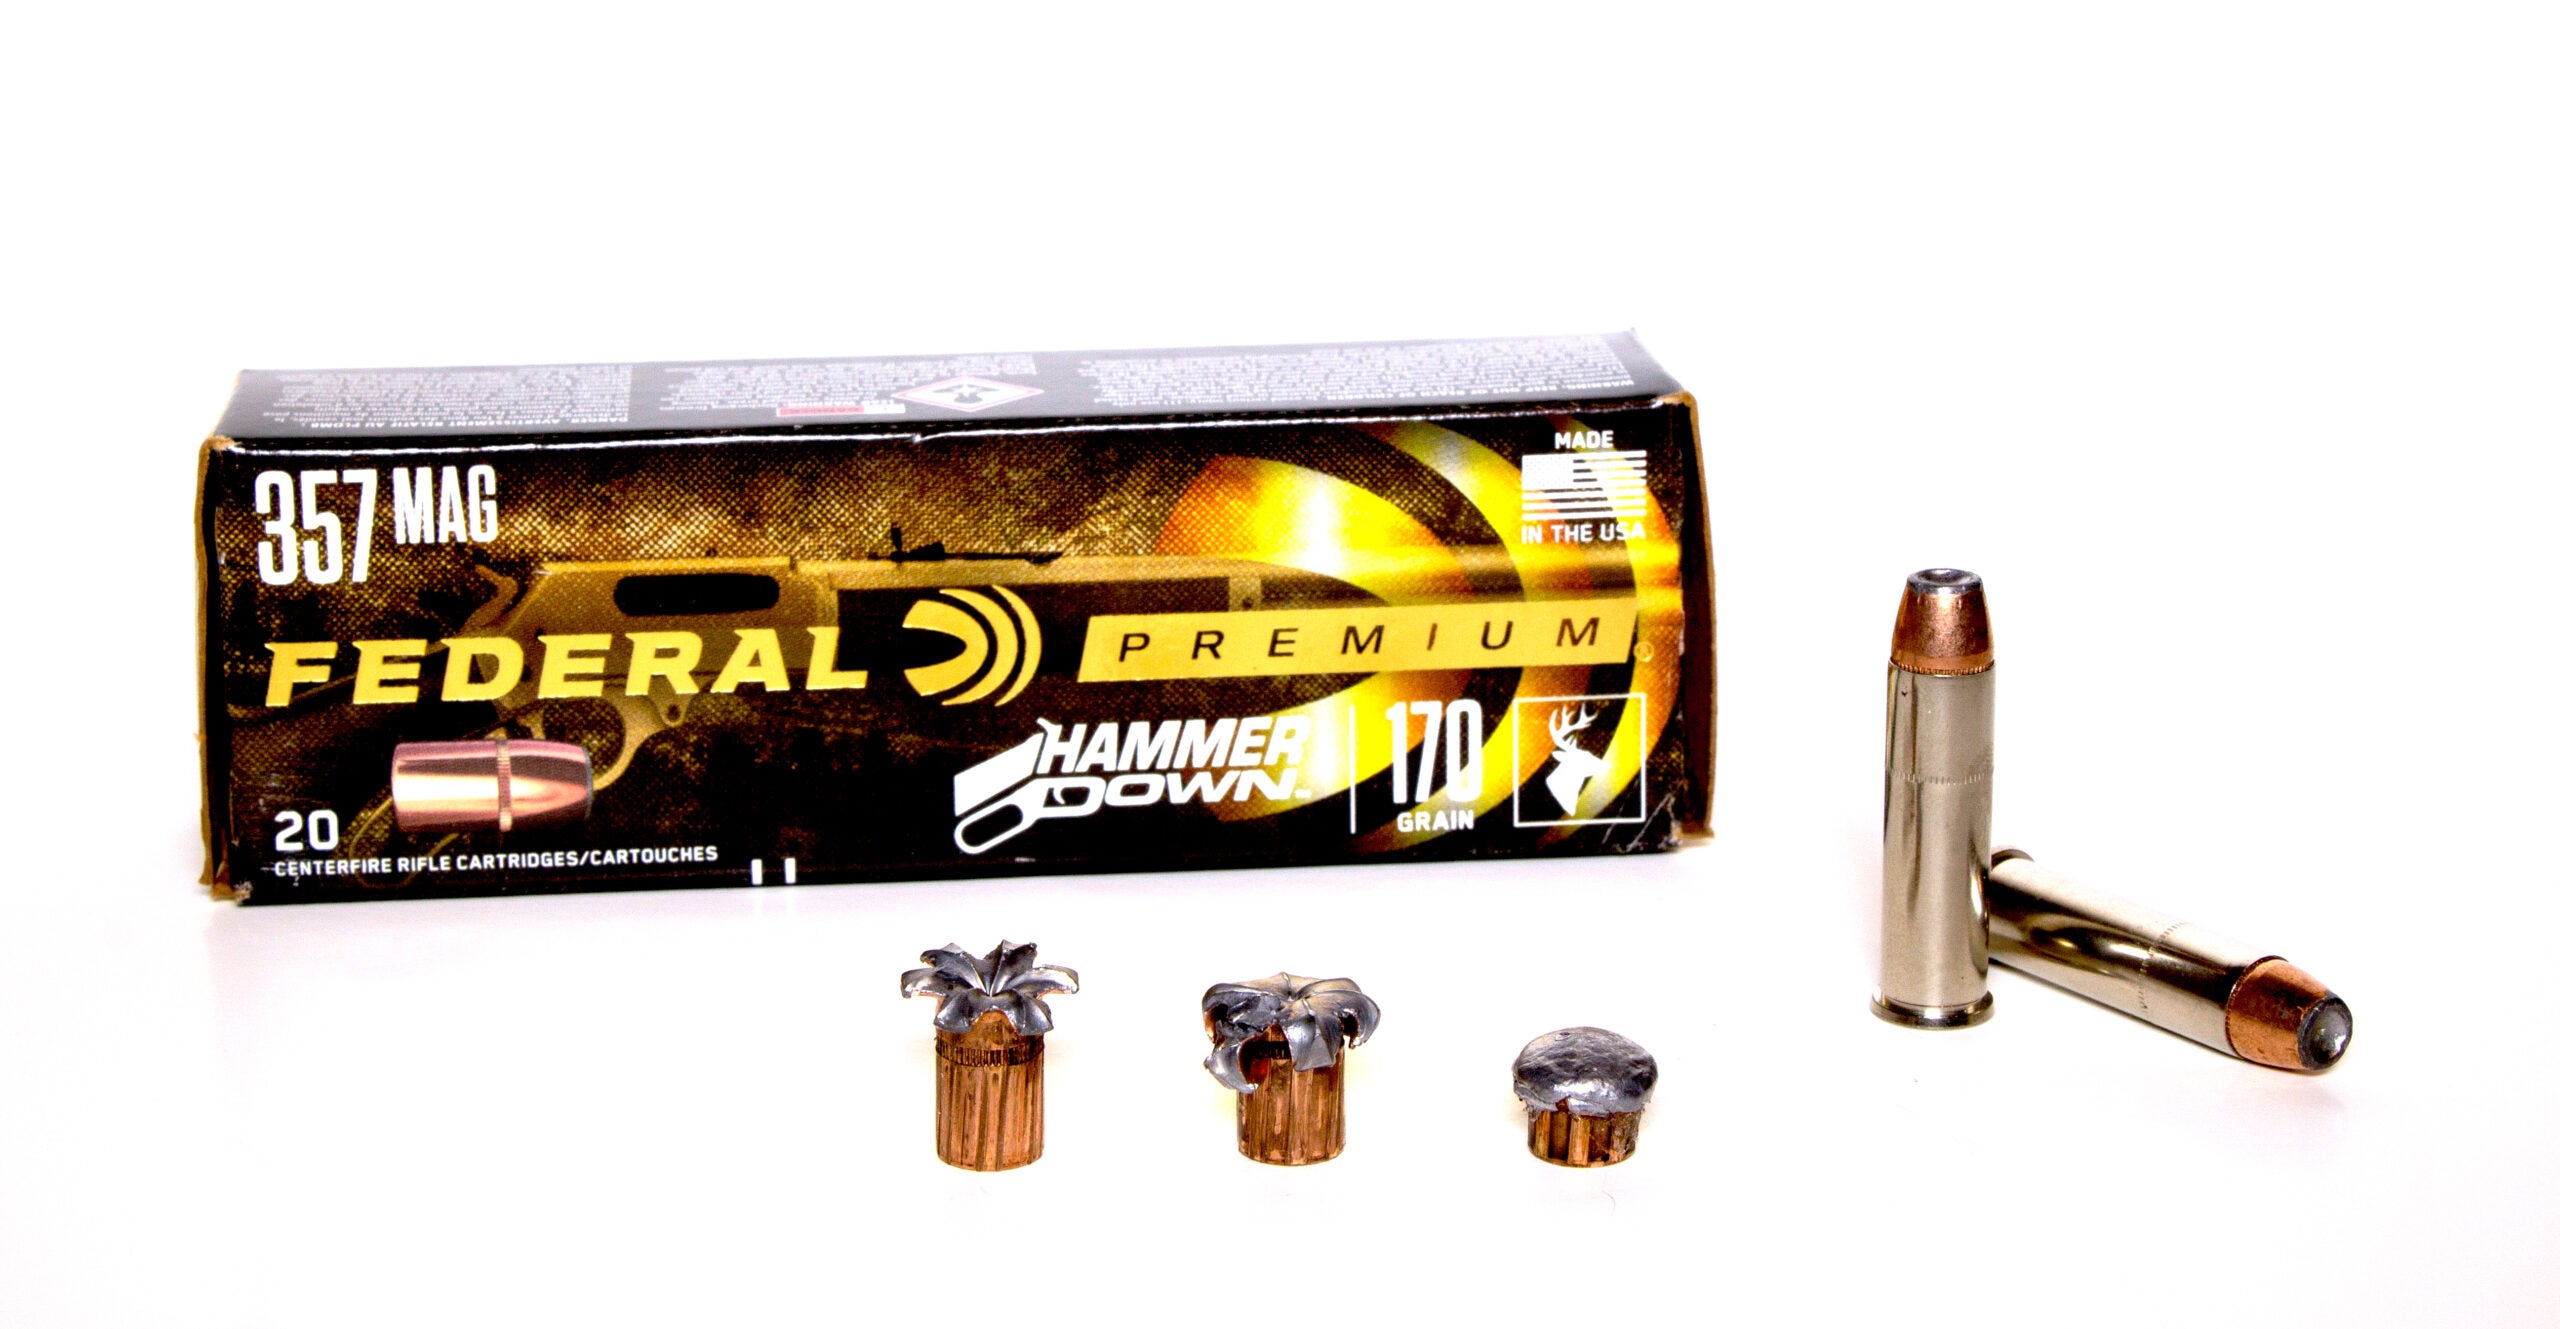 A box of 357 Magnum ammunition with fired bullet and loose rounds on white background